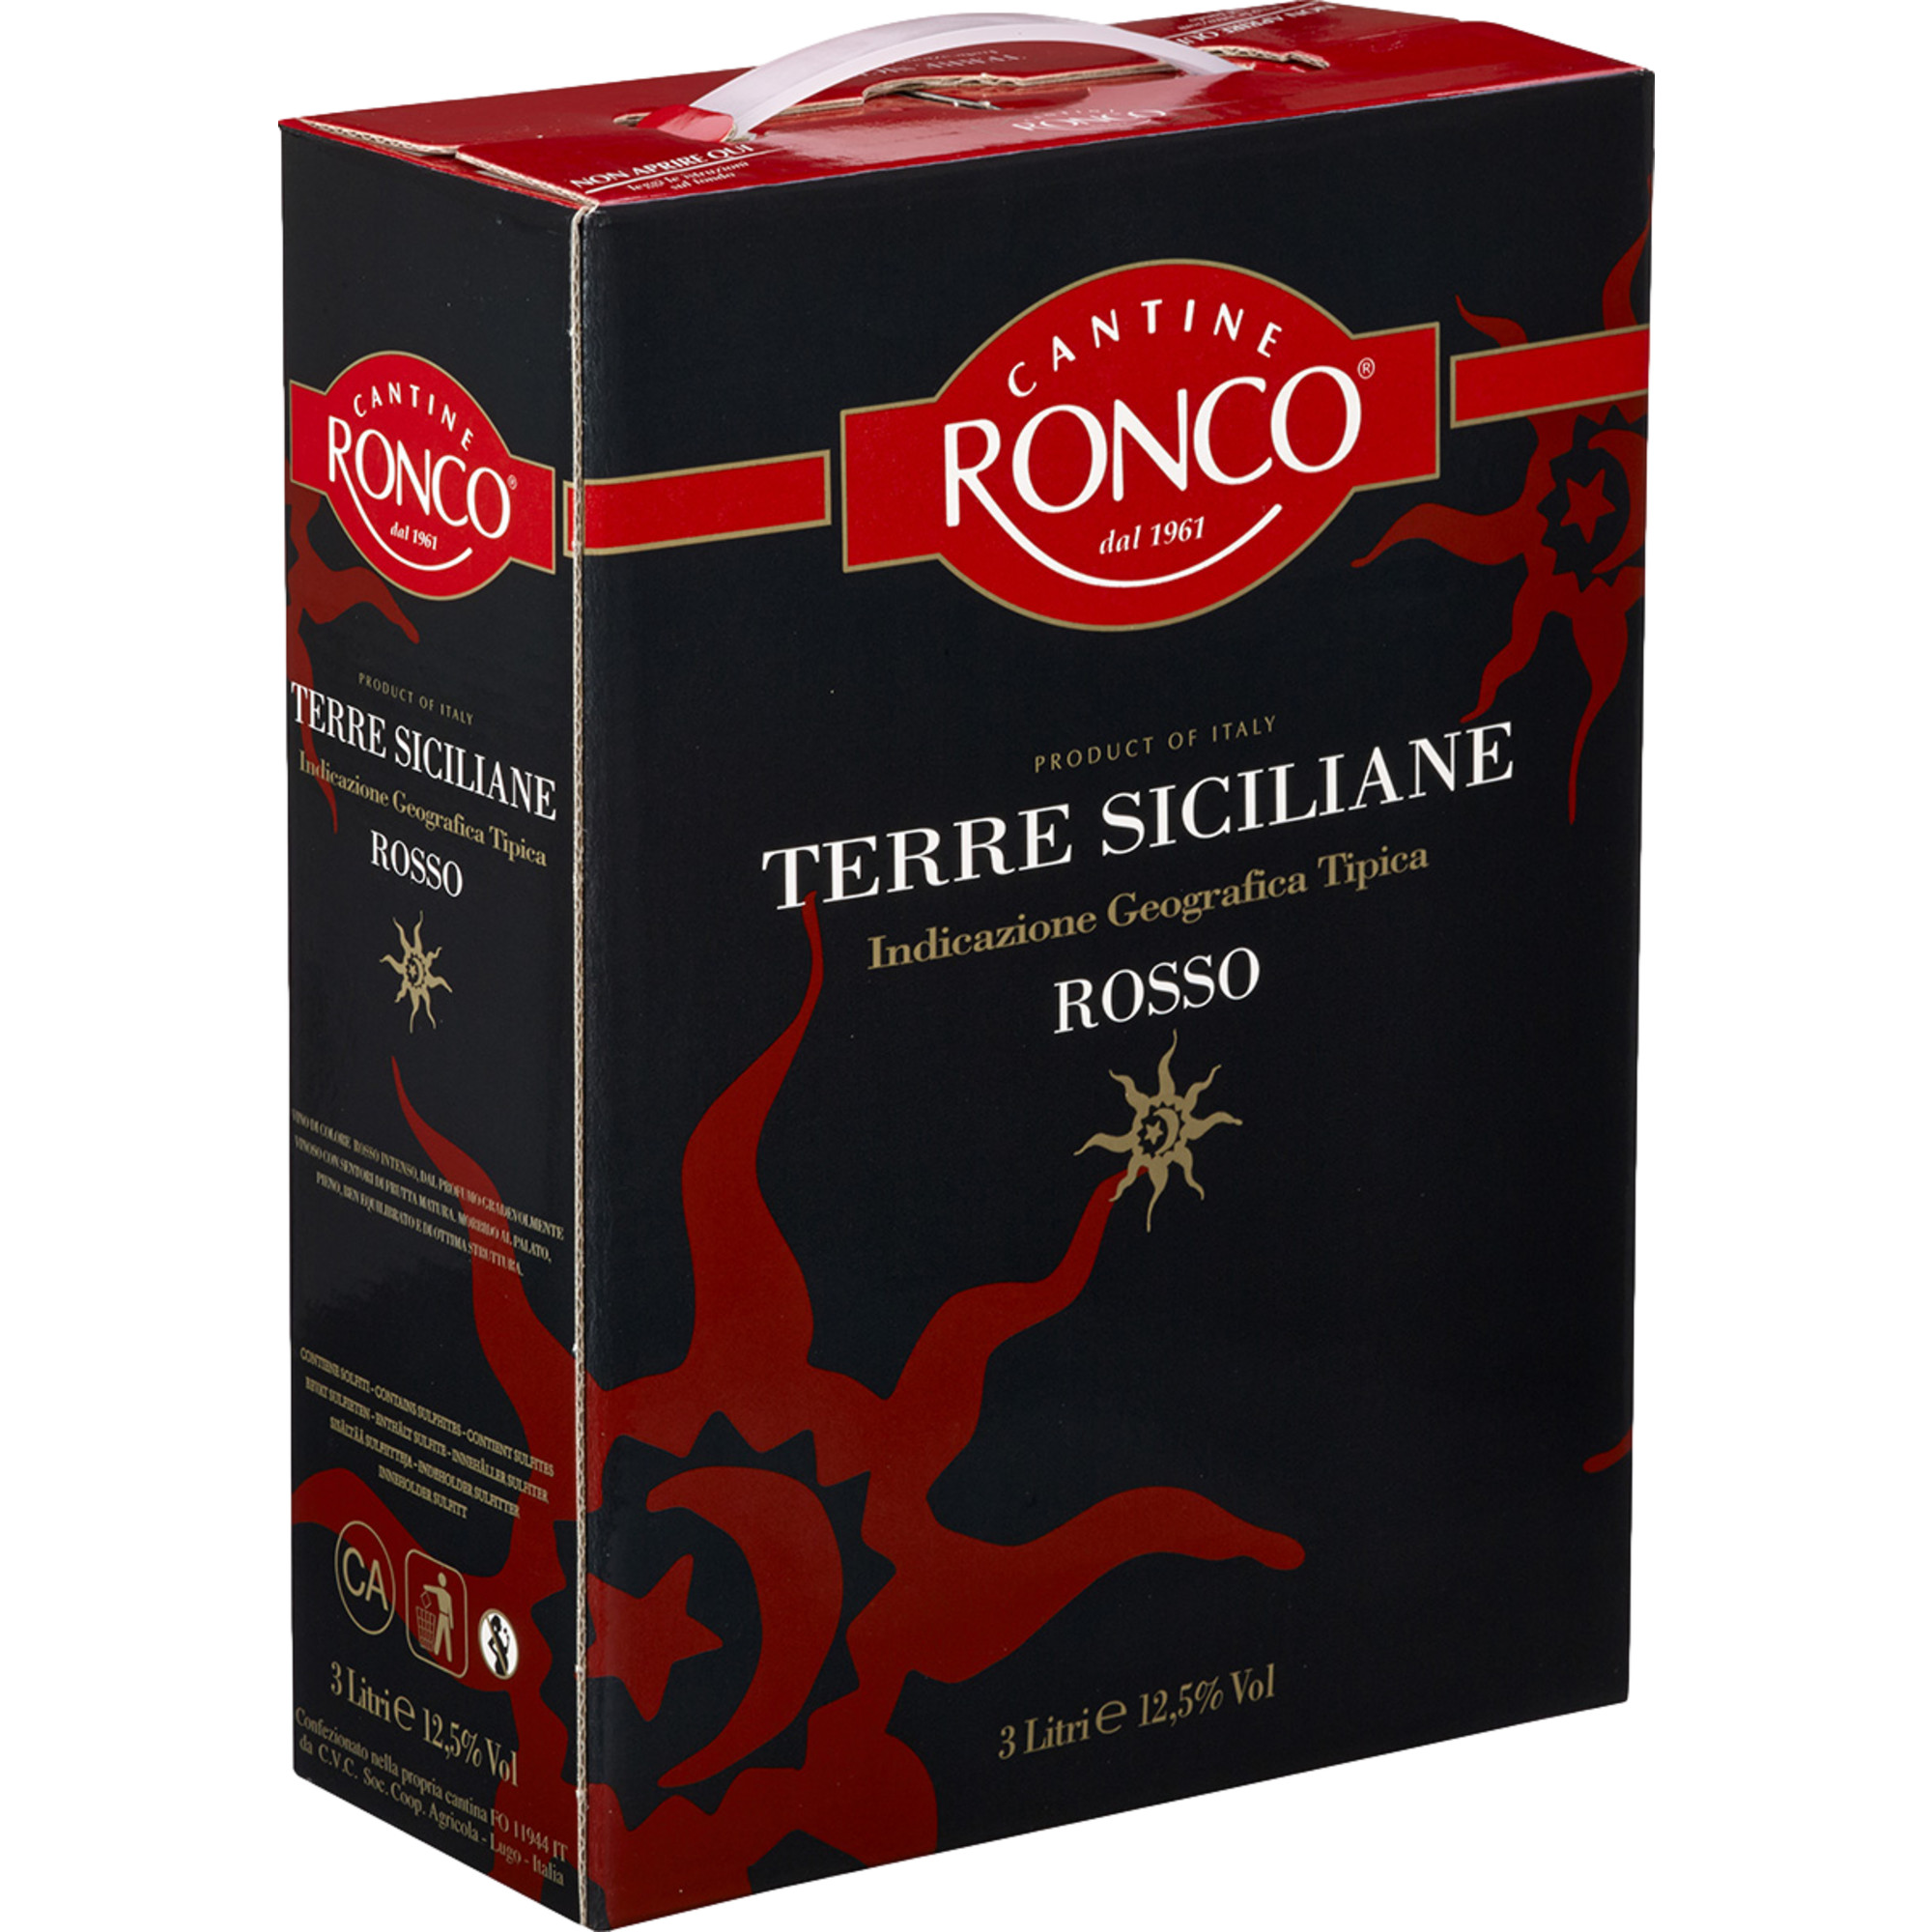 Cantine Ronco, Terre Siciliane IGT, 3,0 L, Bag in Box, Sizilien, Weißwein